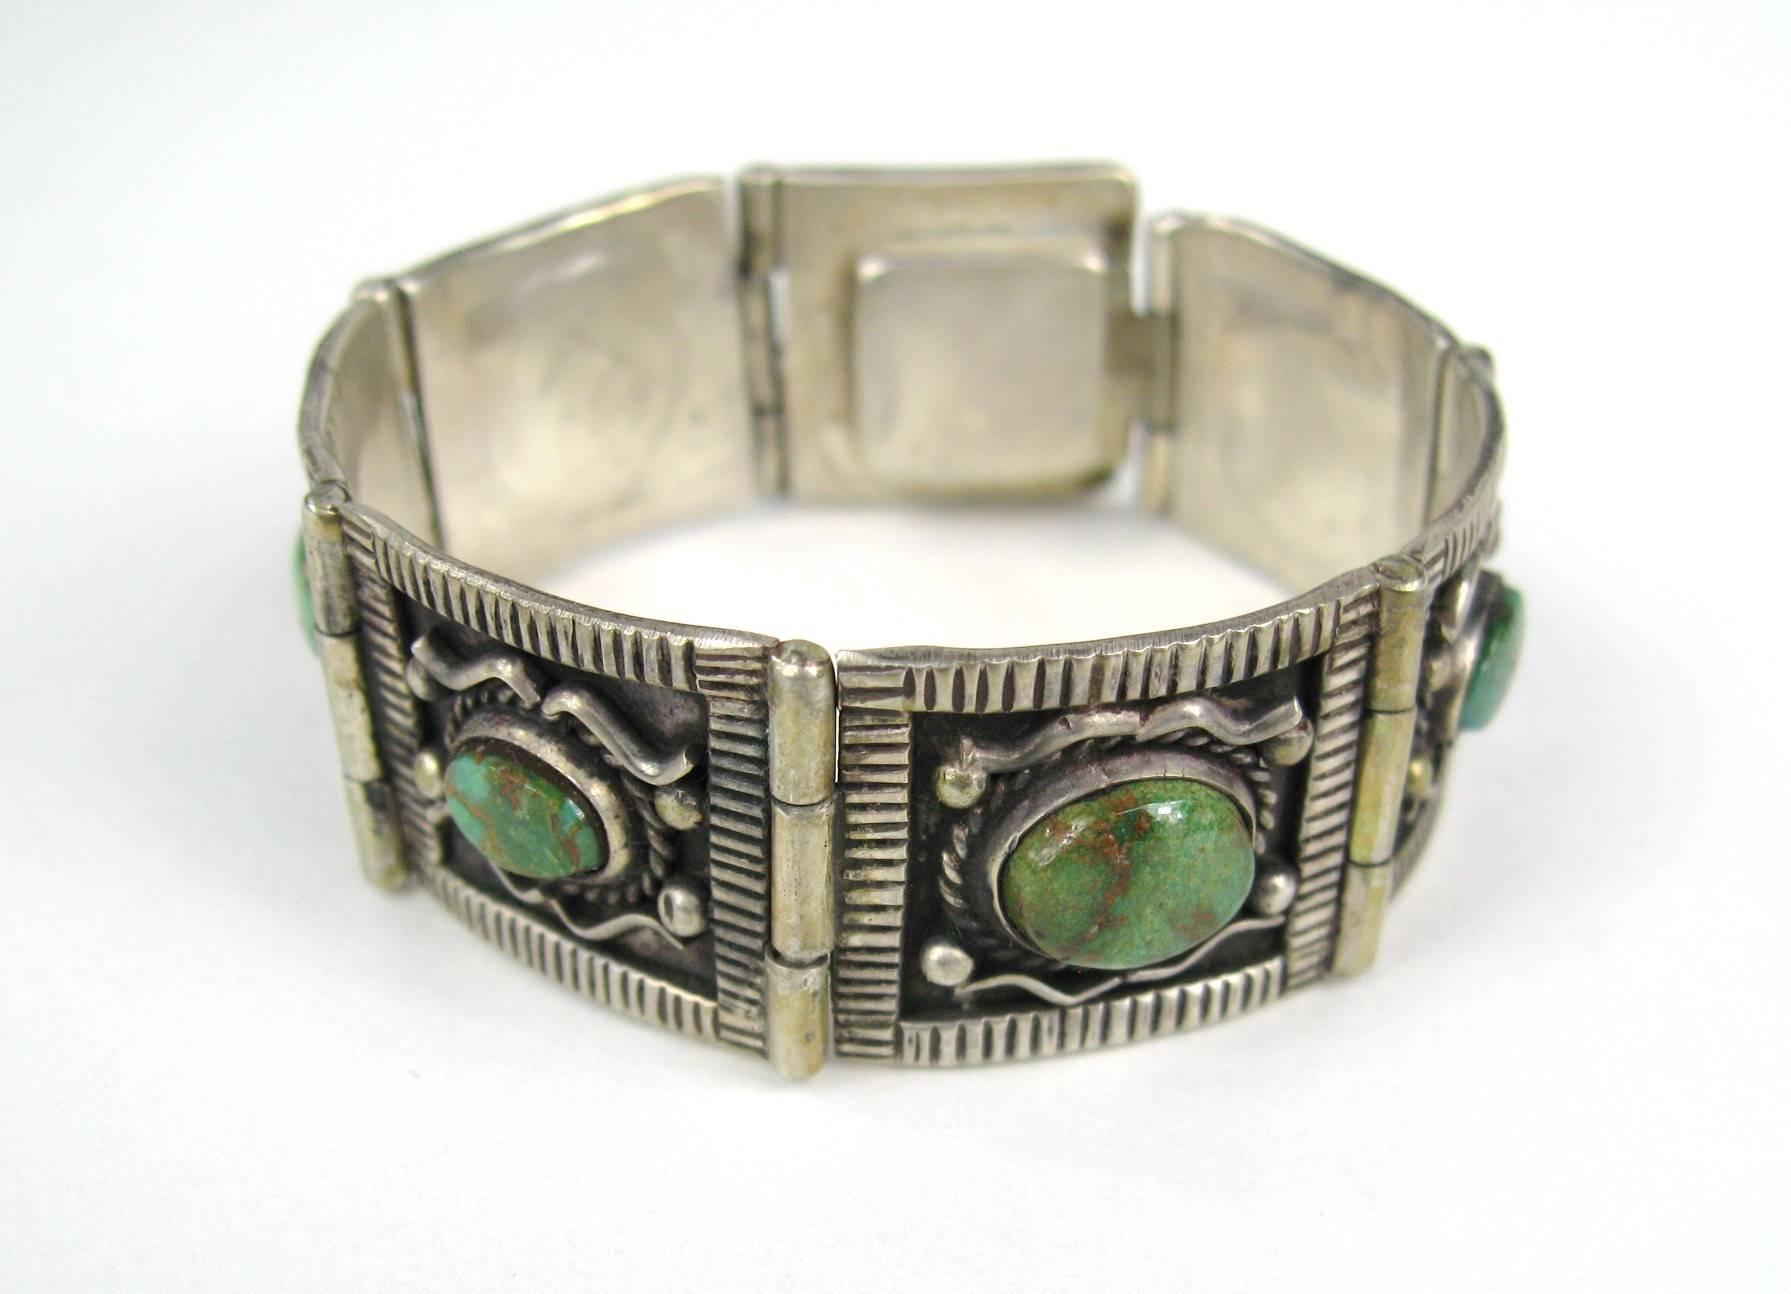 Fabulous  sterling silver paneled bracelet with a slide in clasp. Measuring .81 in wide - 7.5 inches end to end. 7 Panels each with a bezel set Turquoise stone. Will fit a 6